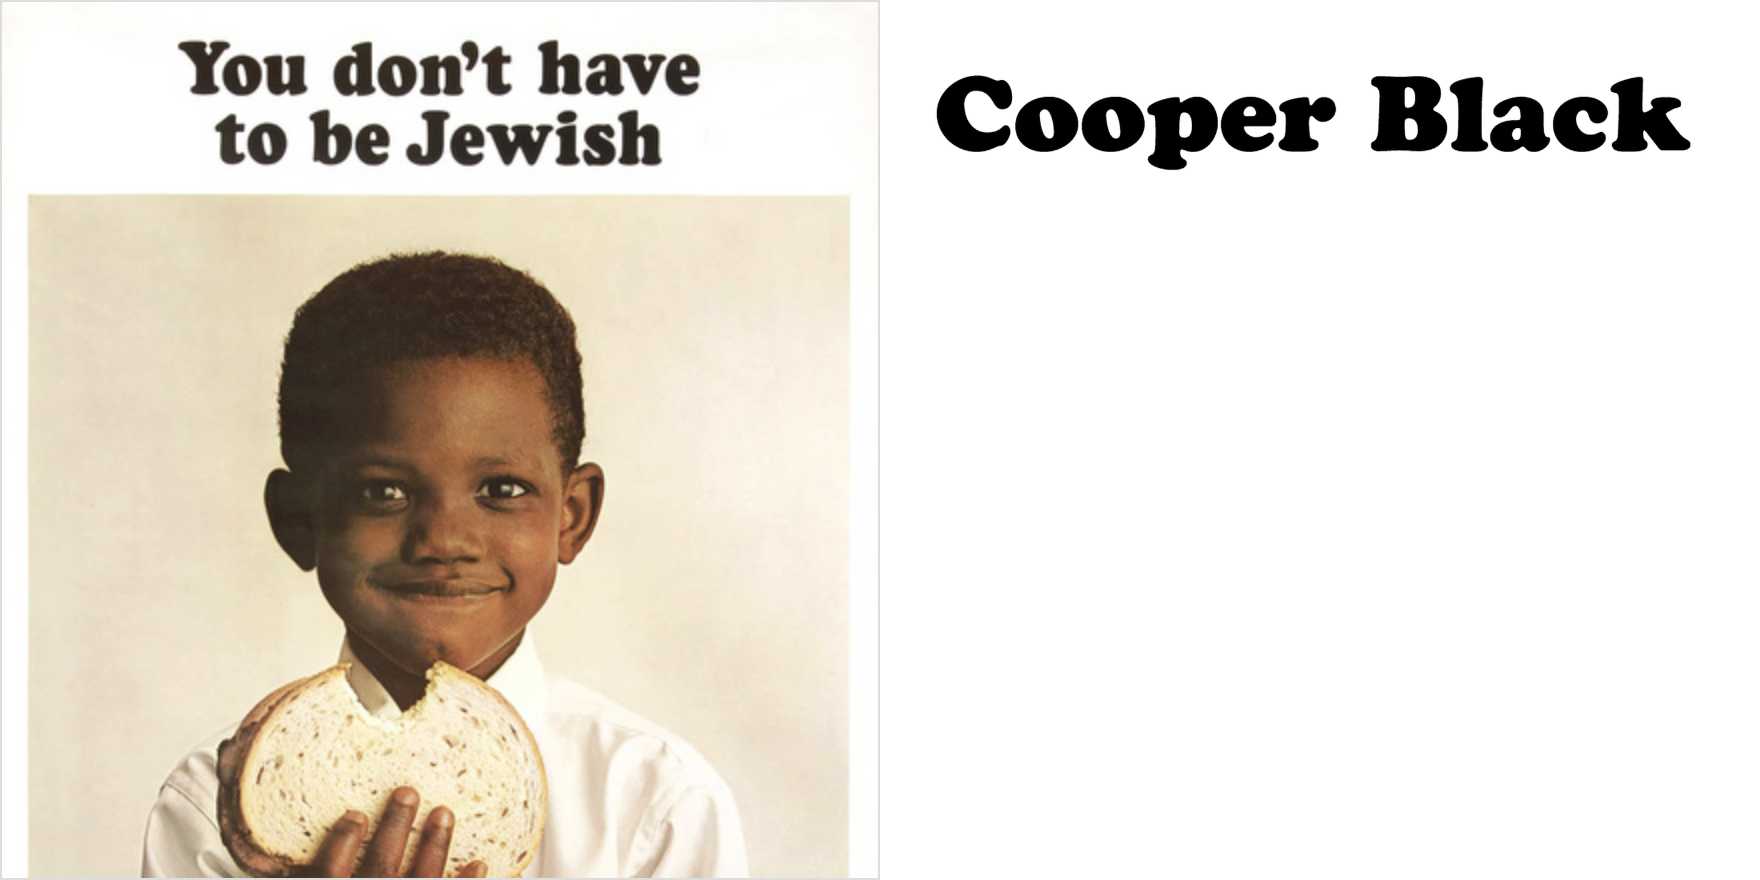 Levy's ad campaign: “You don't have to be Jewish” (1961–70s) - Fonts In Use